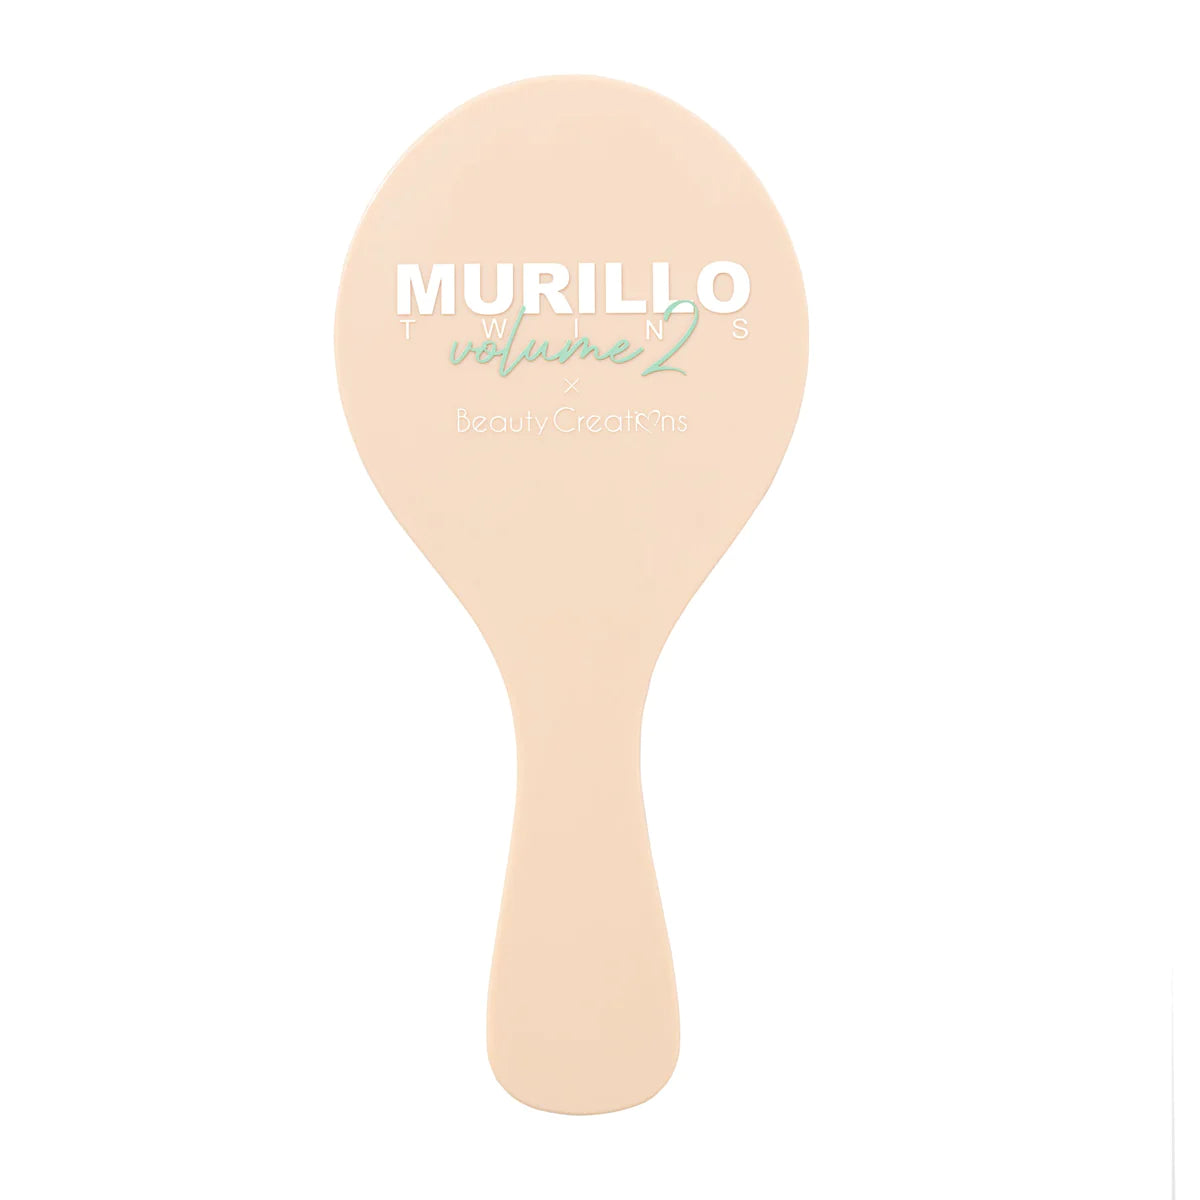 Hand held mirror Double Take MURILLO TWINS 2 Beauty Creations